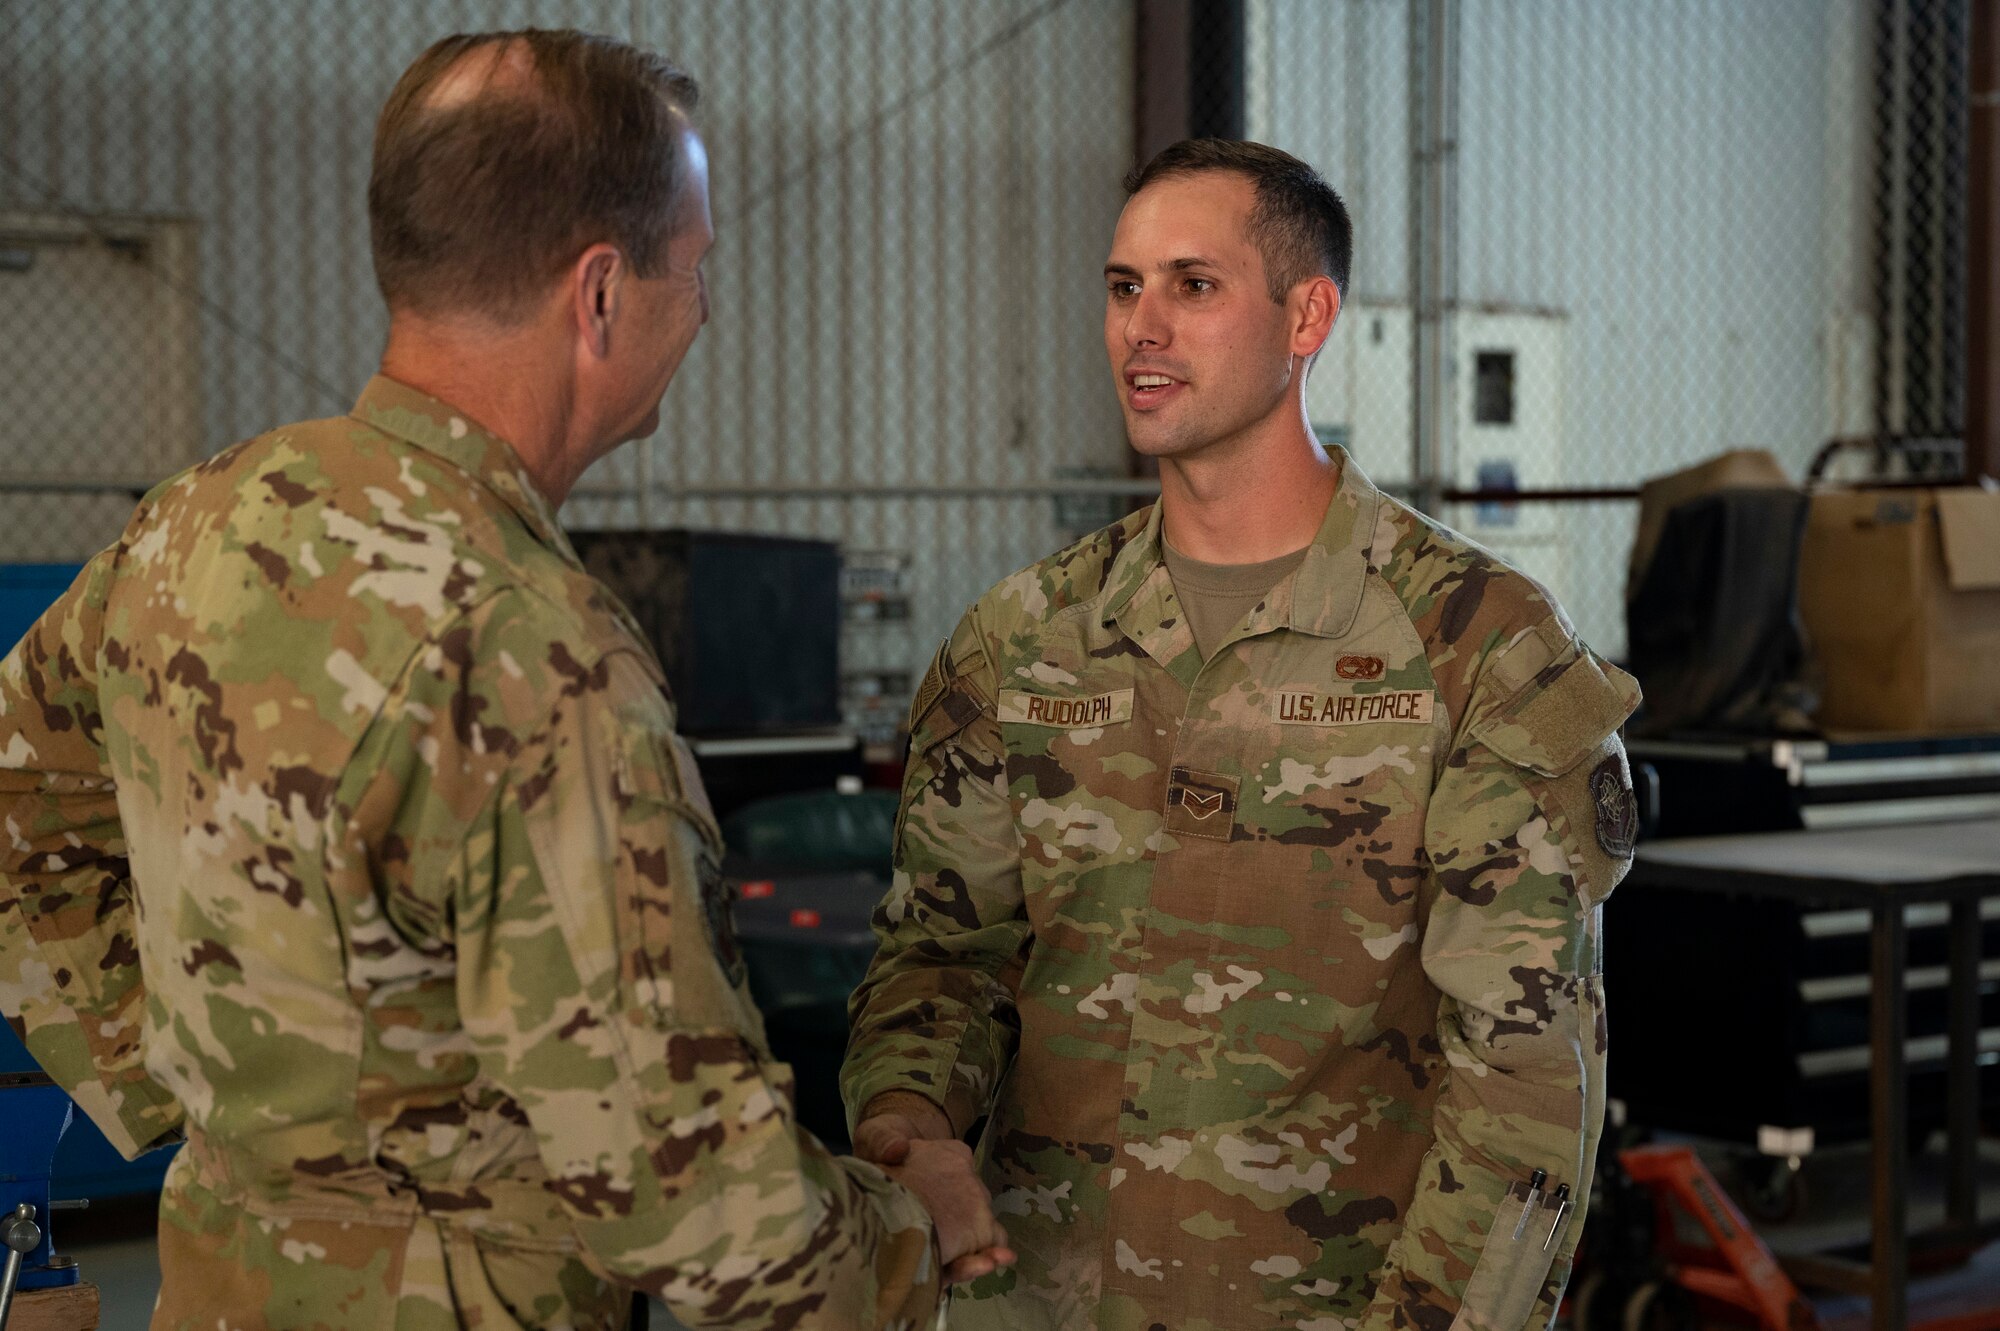 Maj. Gen. Corey Martin, 18th Air Force commander, coins Senior Airman Cory Rudolph, 317th Maintenance Squadron aerospace maintenance apprentice, at Dyess Air Force Base, Texas, Aug. 25, 2022. Gen. Martin was briefed on recent developments within the Wing by 317th Airlift Wing Airmen. (U.S. Air Force photo by Senior Airman Josiah Brown)